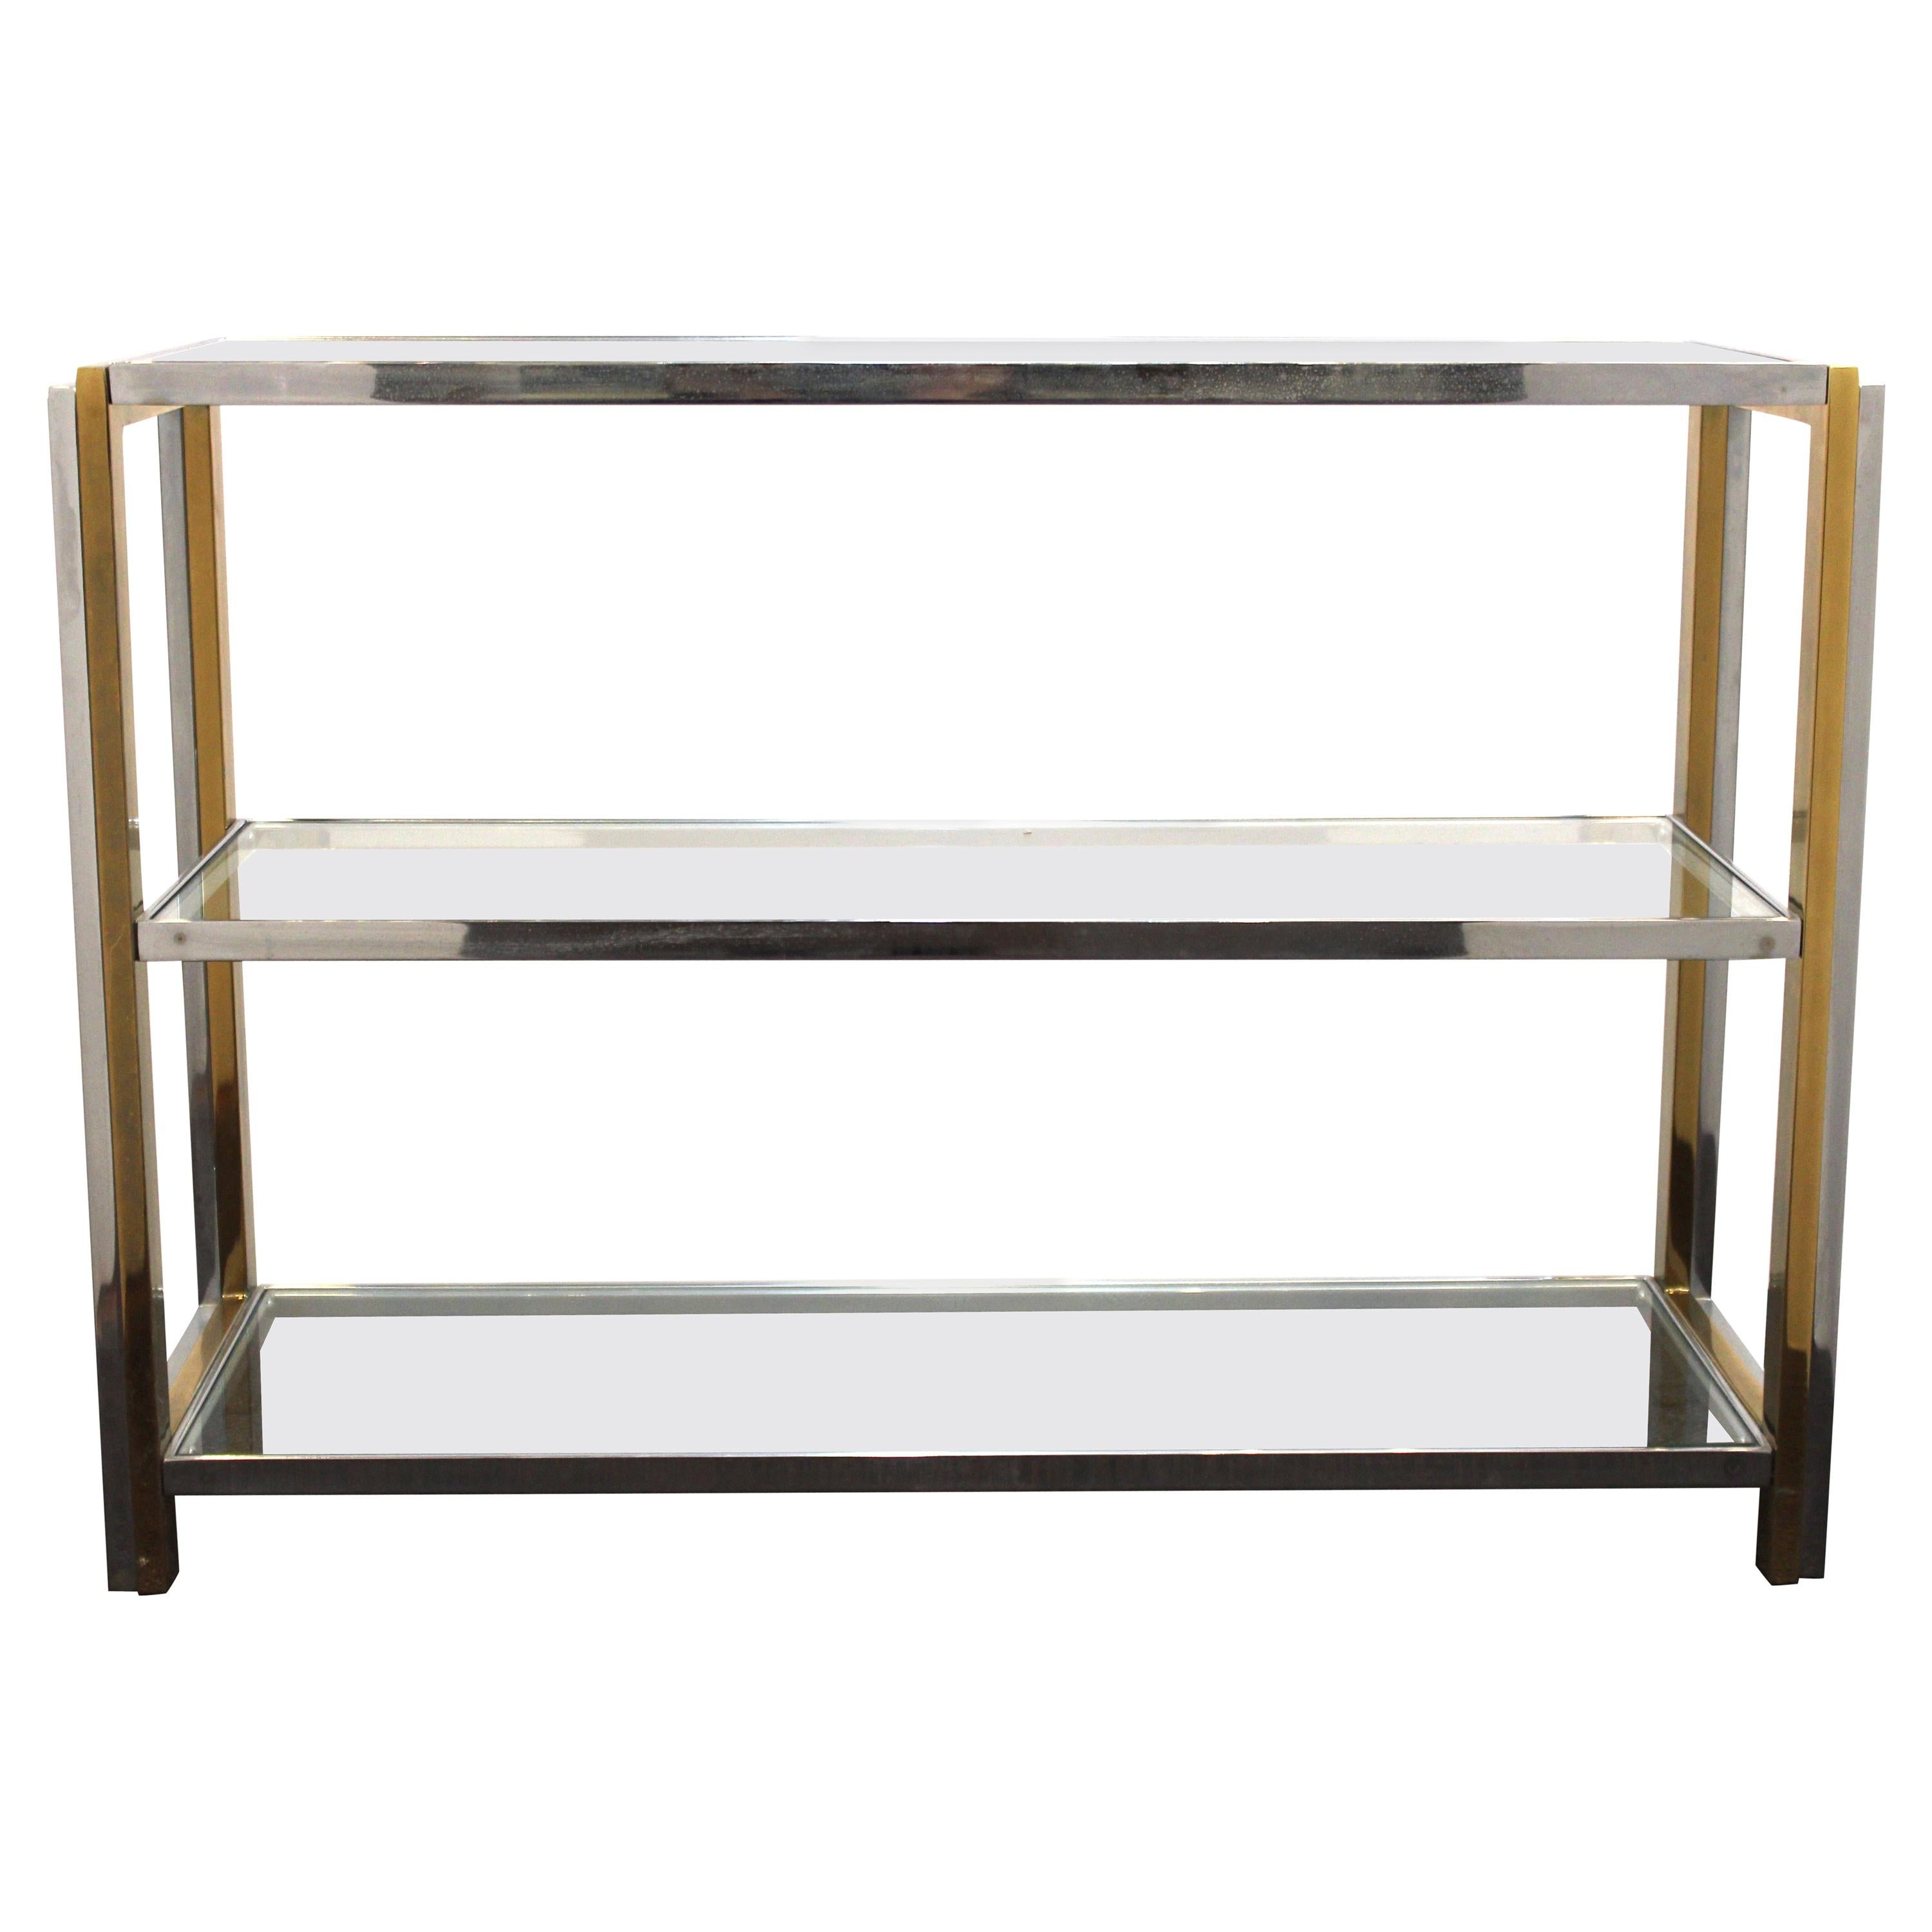 Modern Chrome Sideboard with Glass Shelves